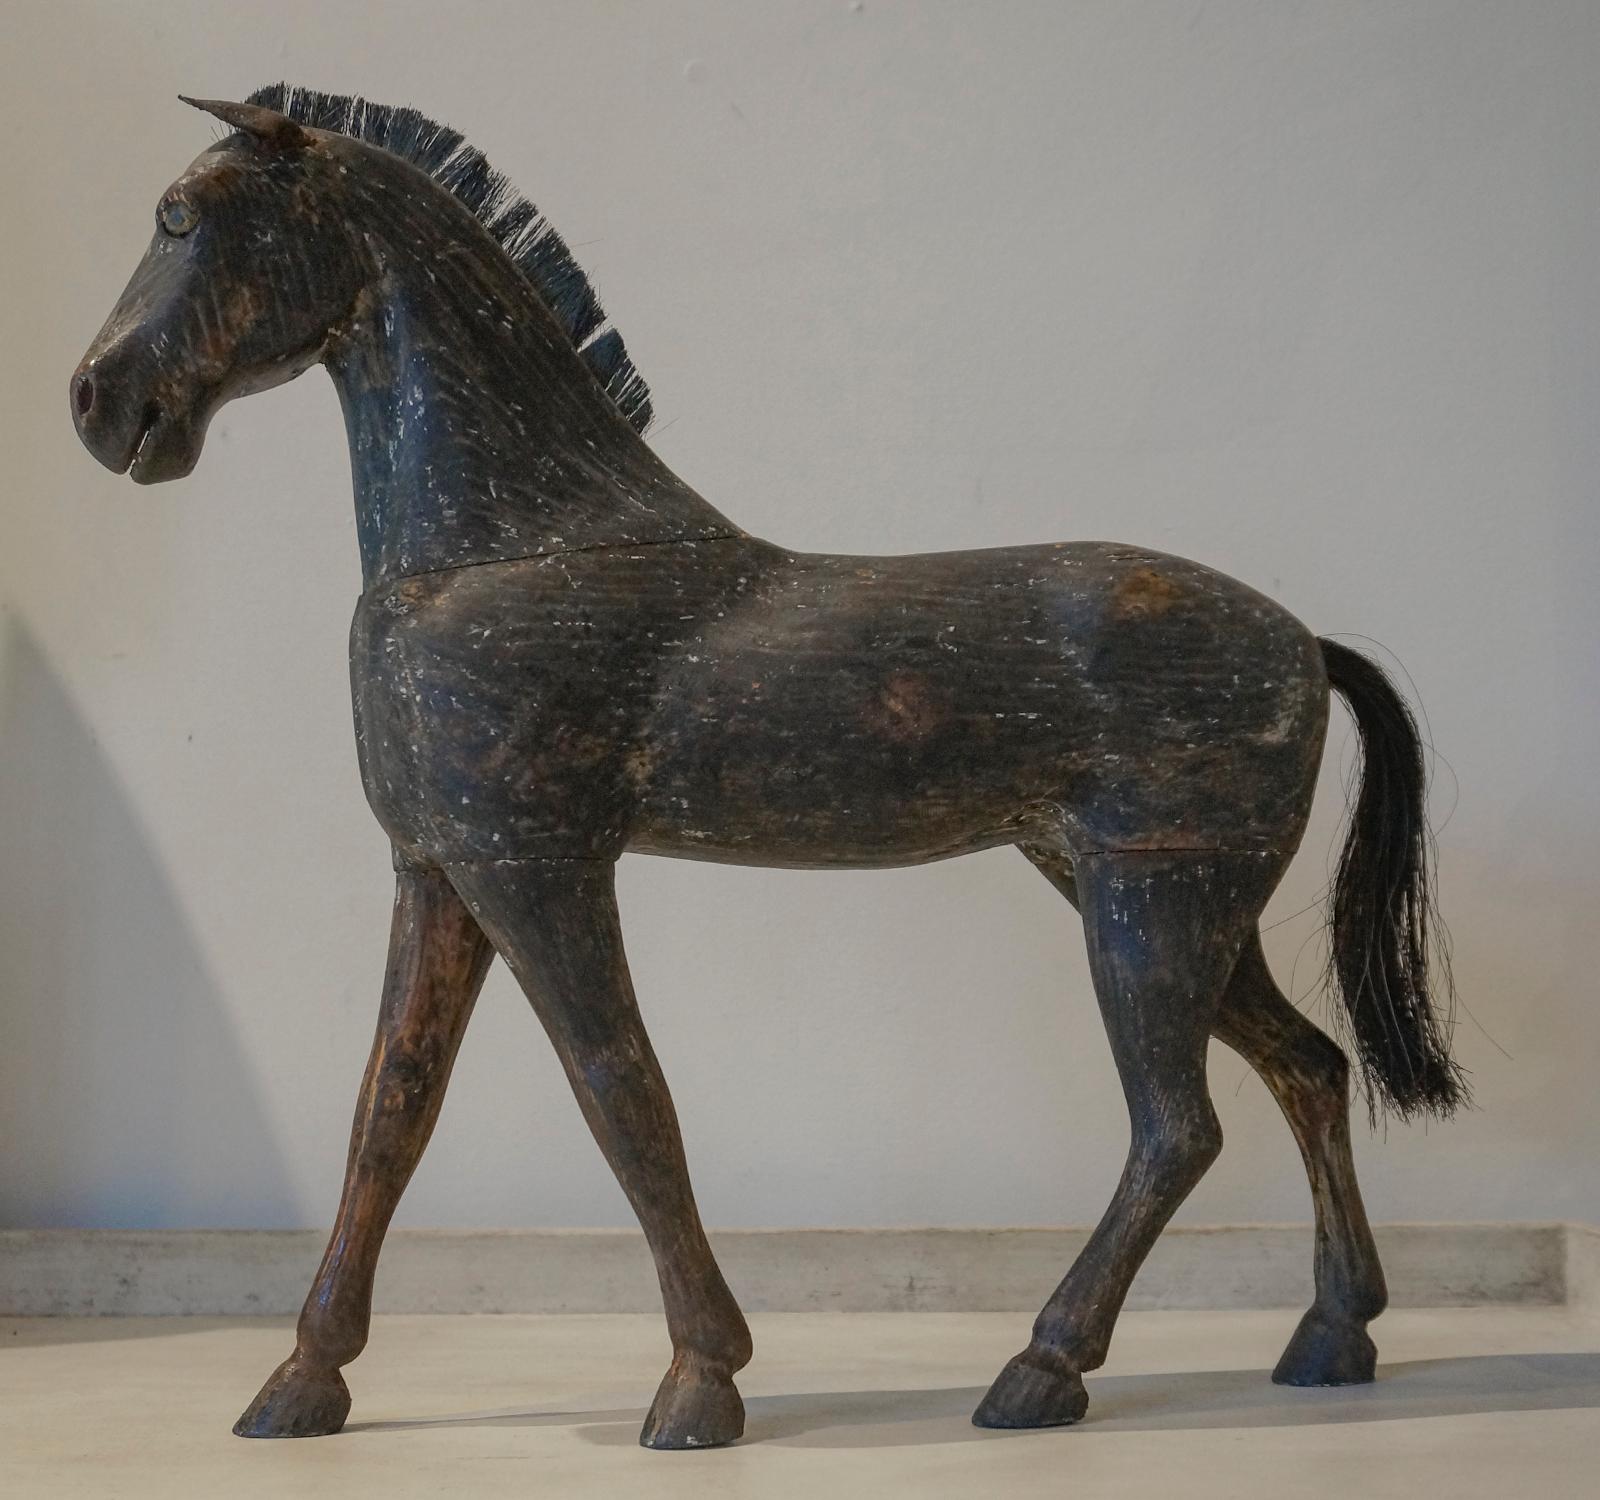 Carved toy horse, Sweden, circa 1880, which retains its original black painted surface. Leather ears and horsehair mane and tail.